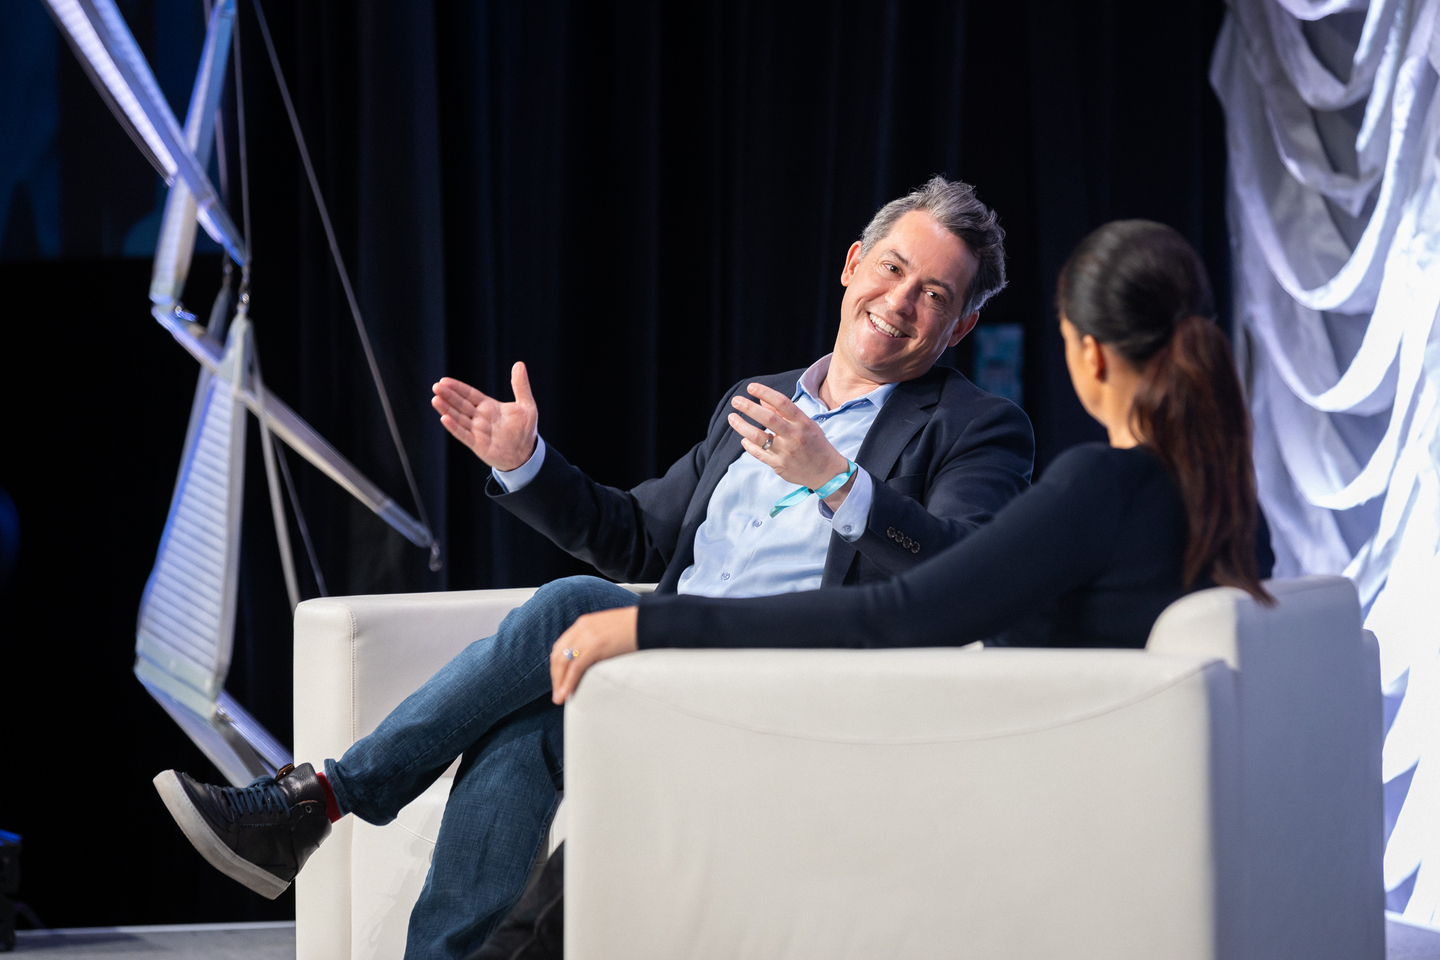 Jim Bankoff and Soledad O’Brien at their Featured Session – Photo by Edward Bennett